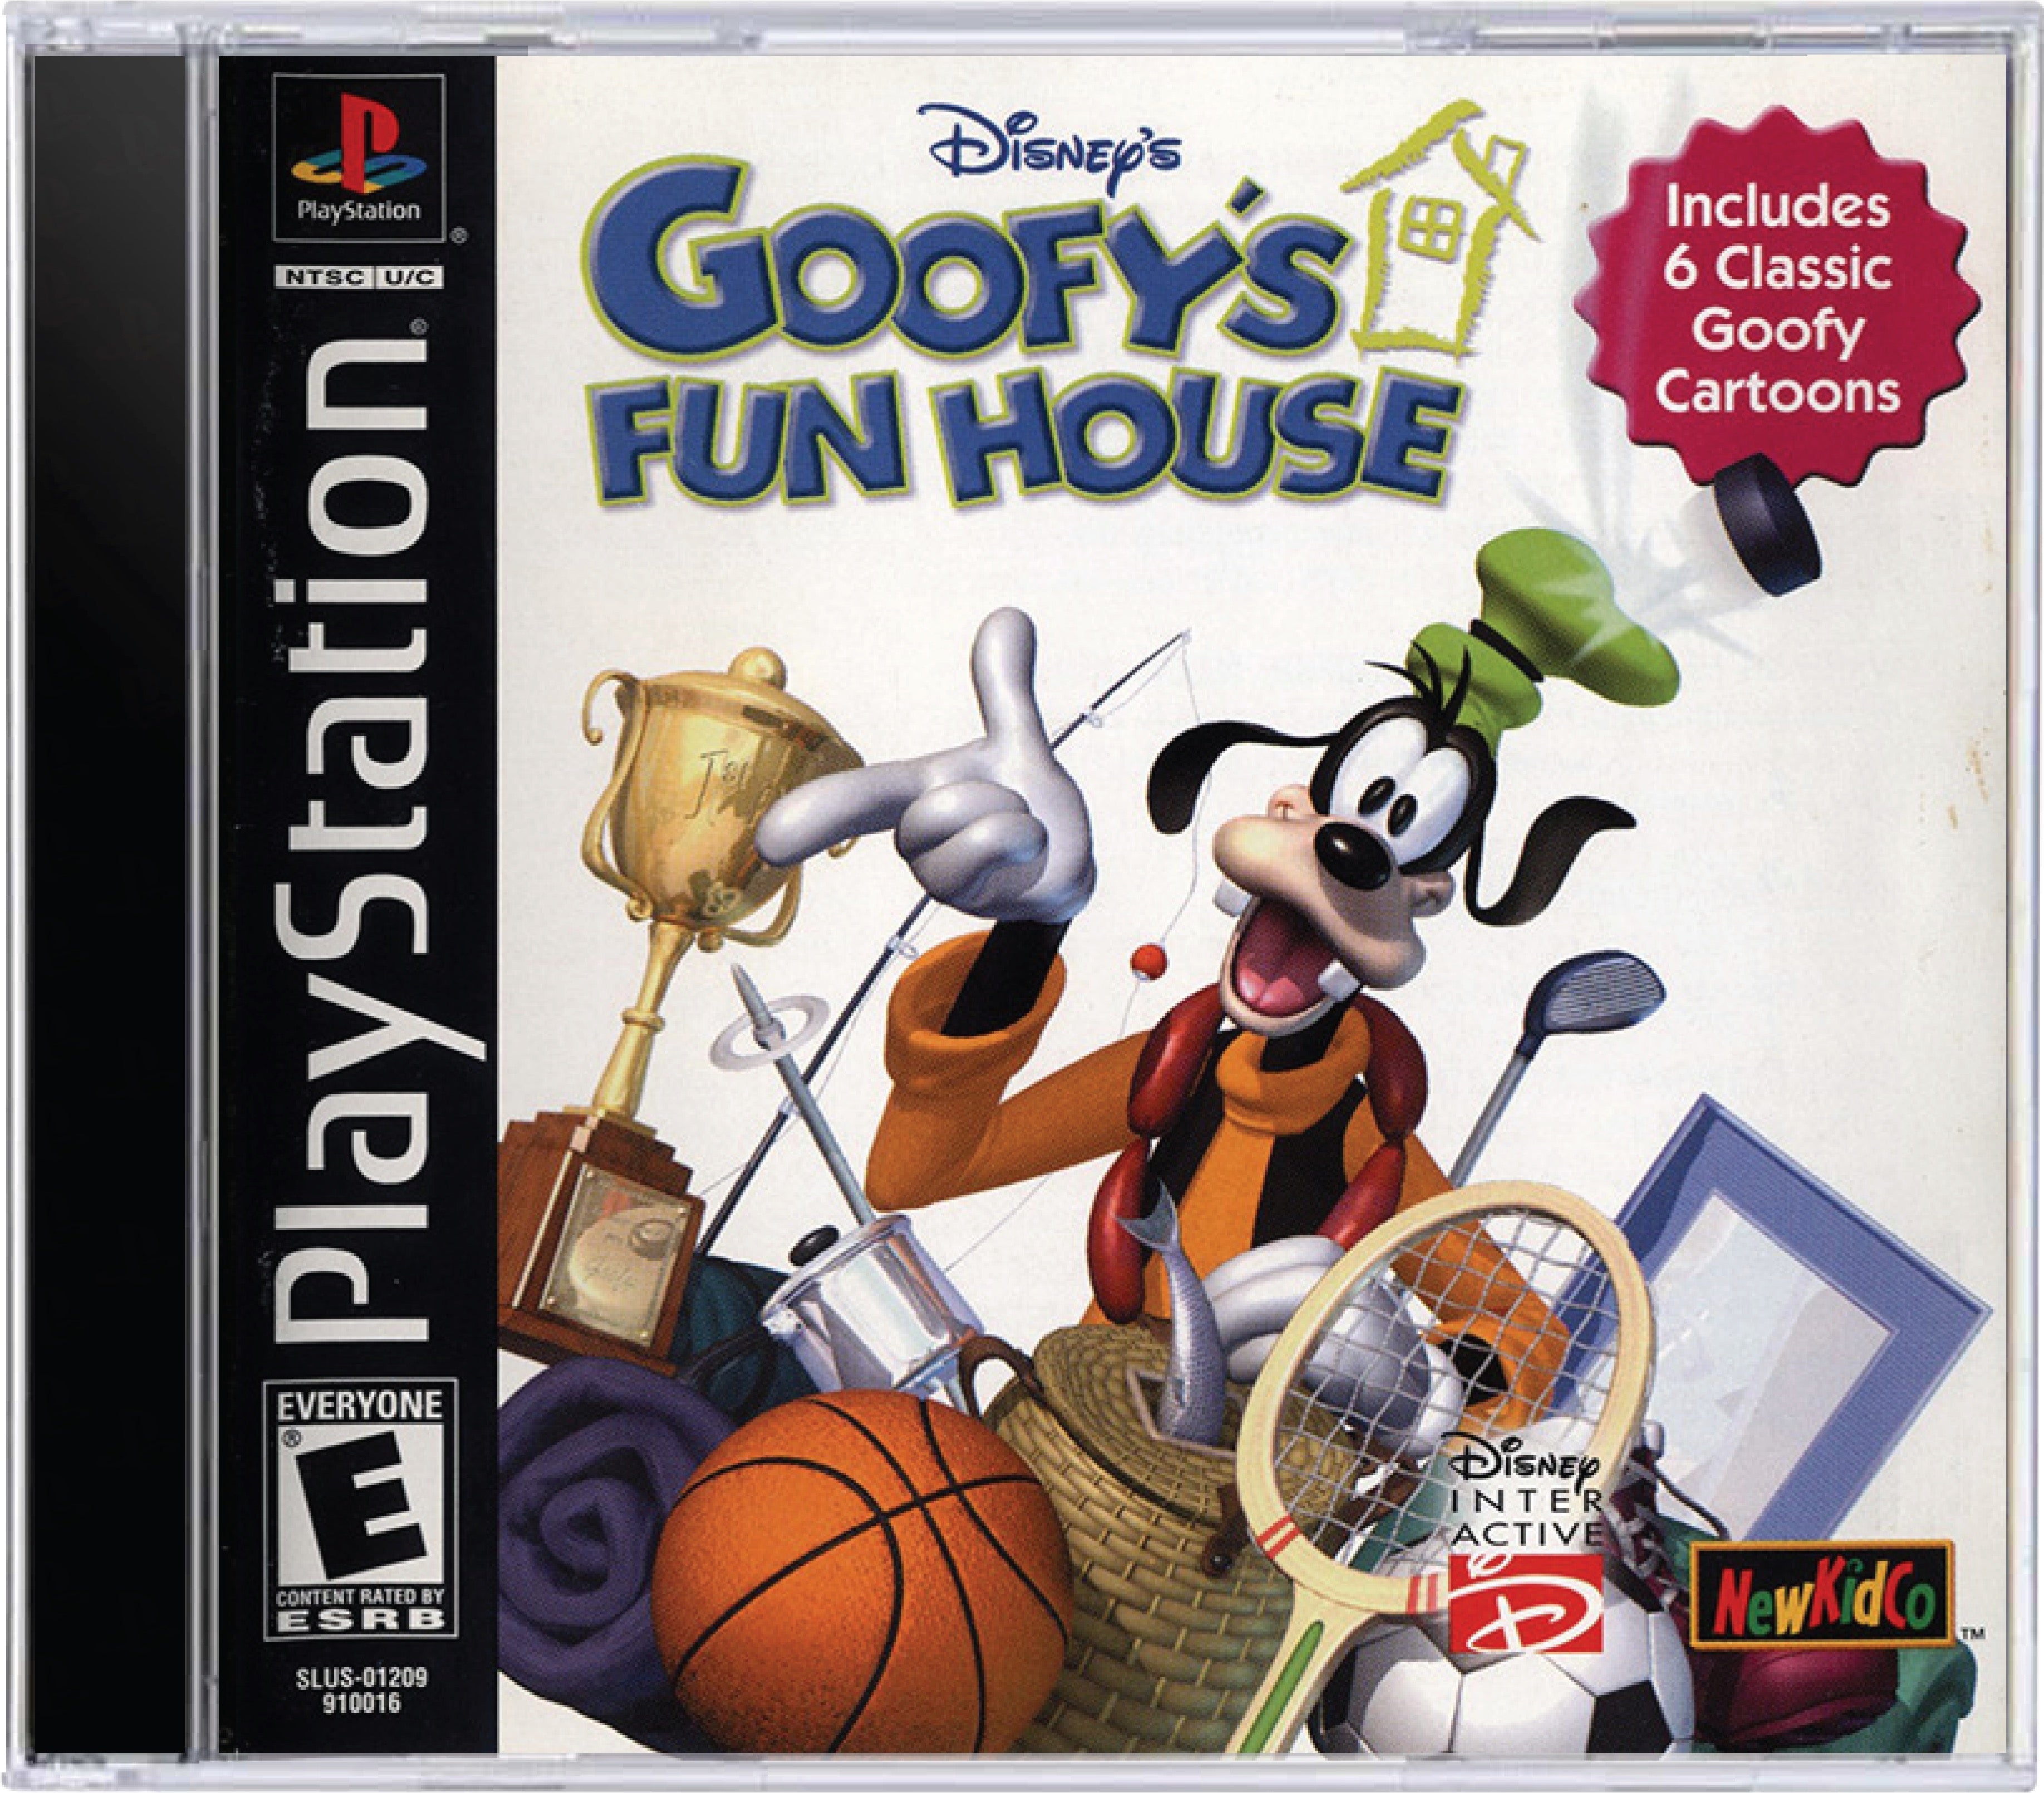 Disney's Goofy's Fun House Cover Art and Product Photo